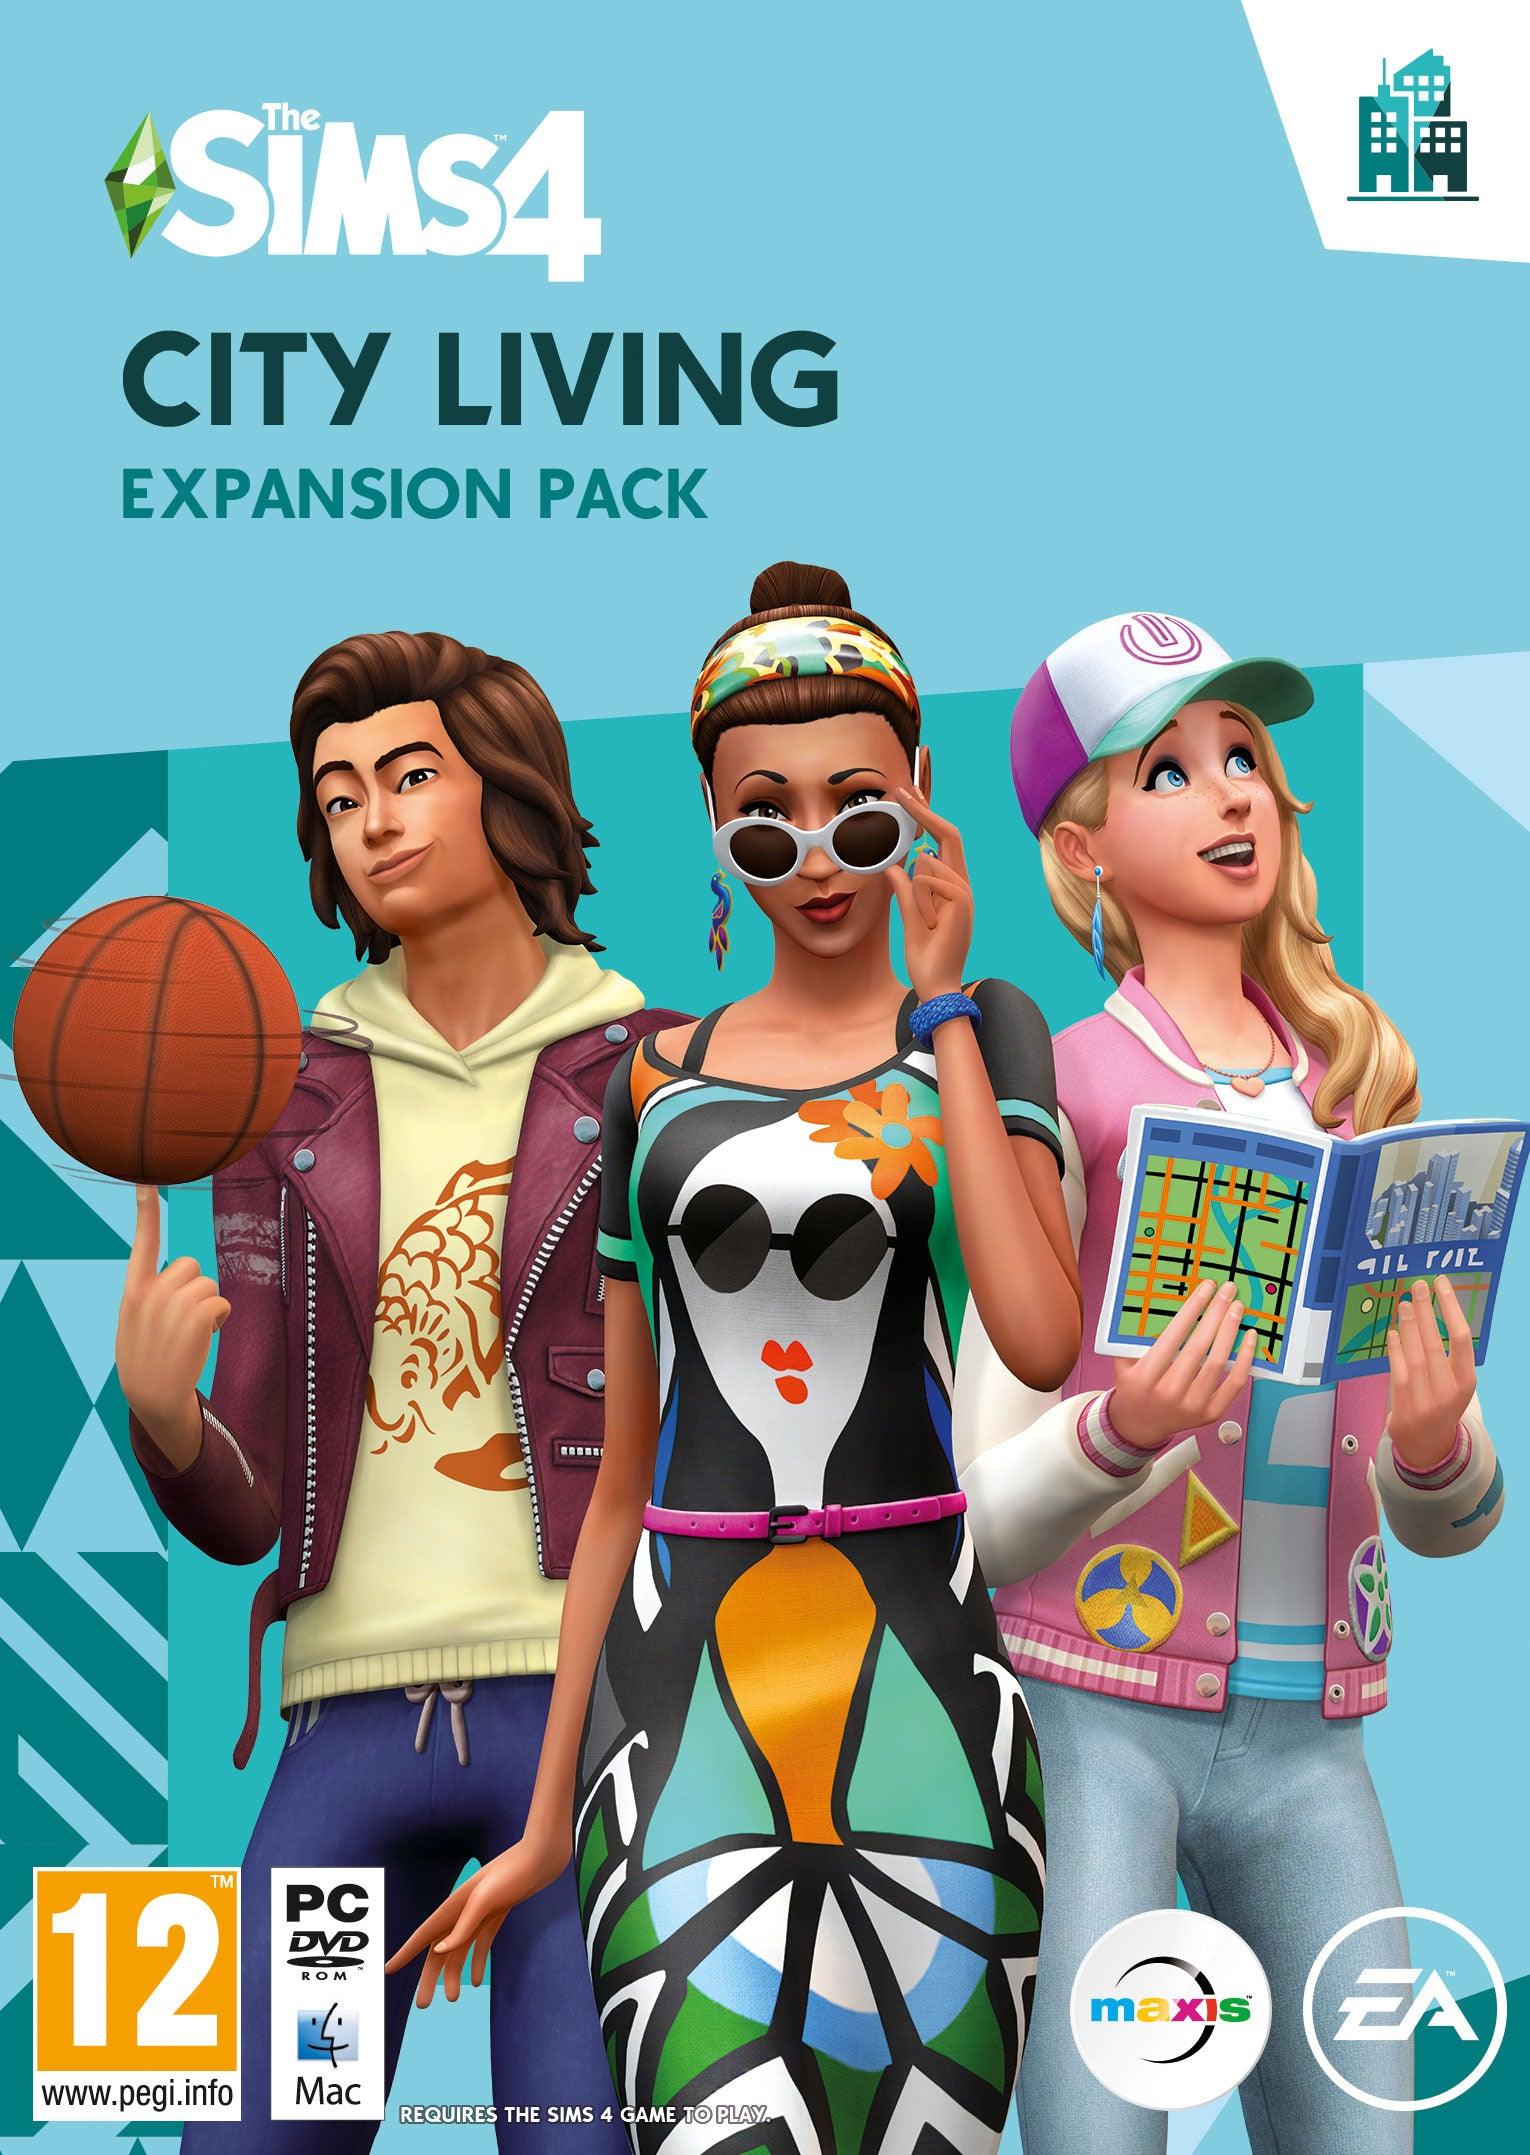 The Sims 4 City Living - Want a New Gadget